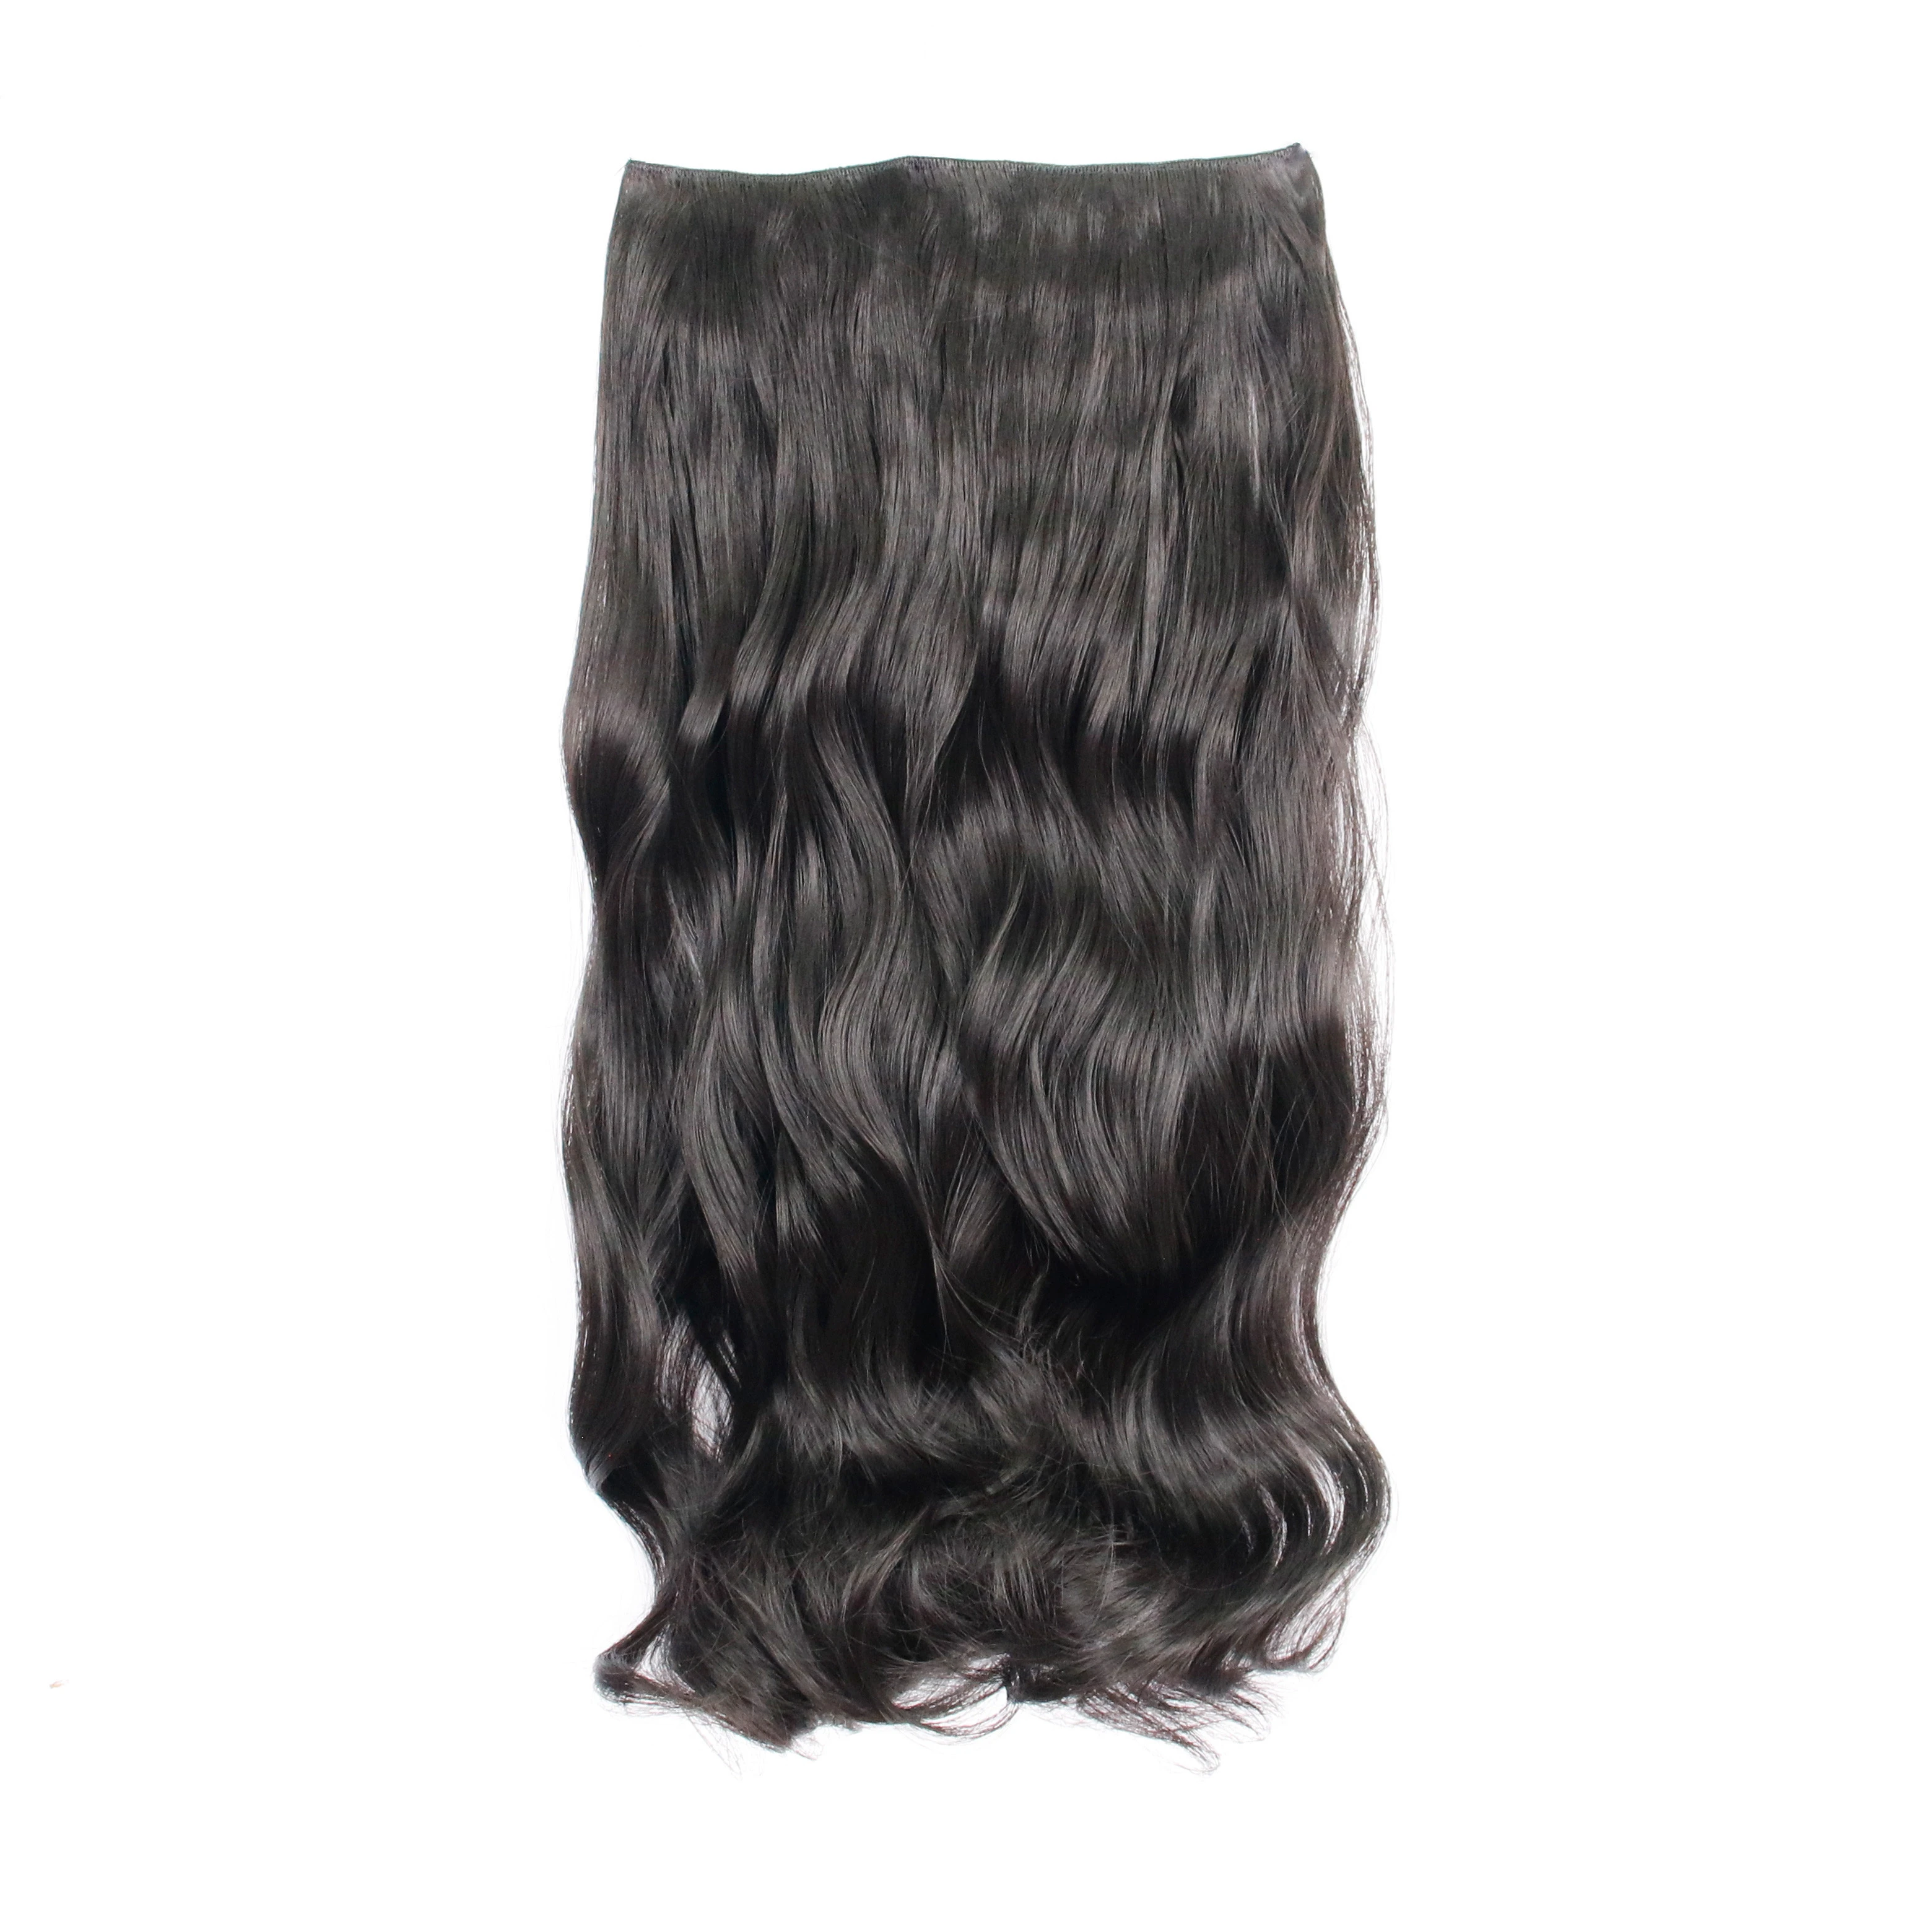 half wig clip in hair extensions Long Curly/Wavy Synthetic Hair 5 Clips in Hair Extensions